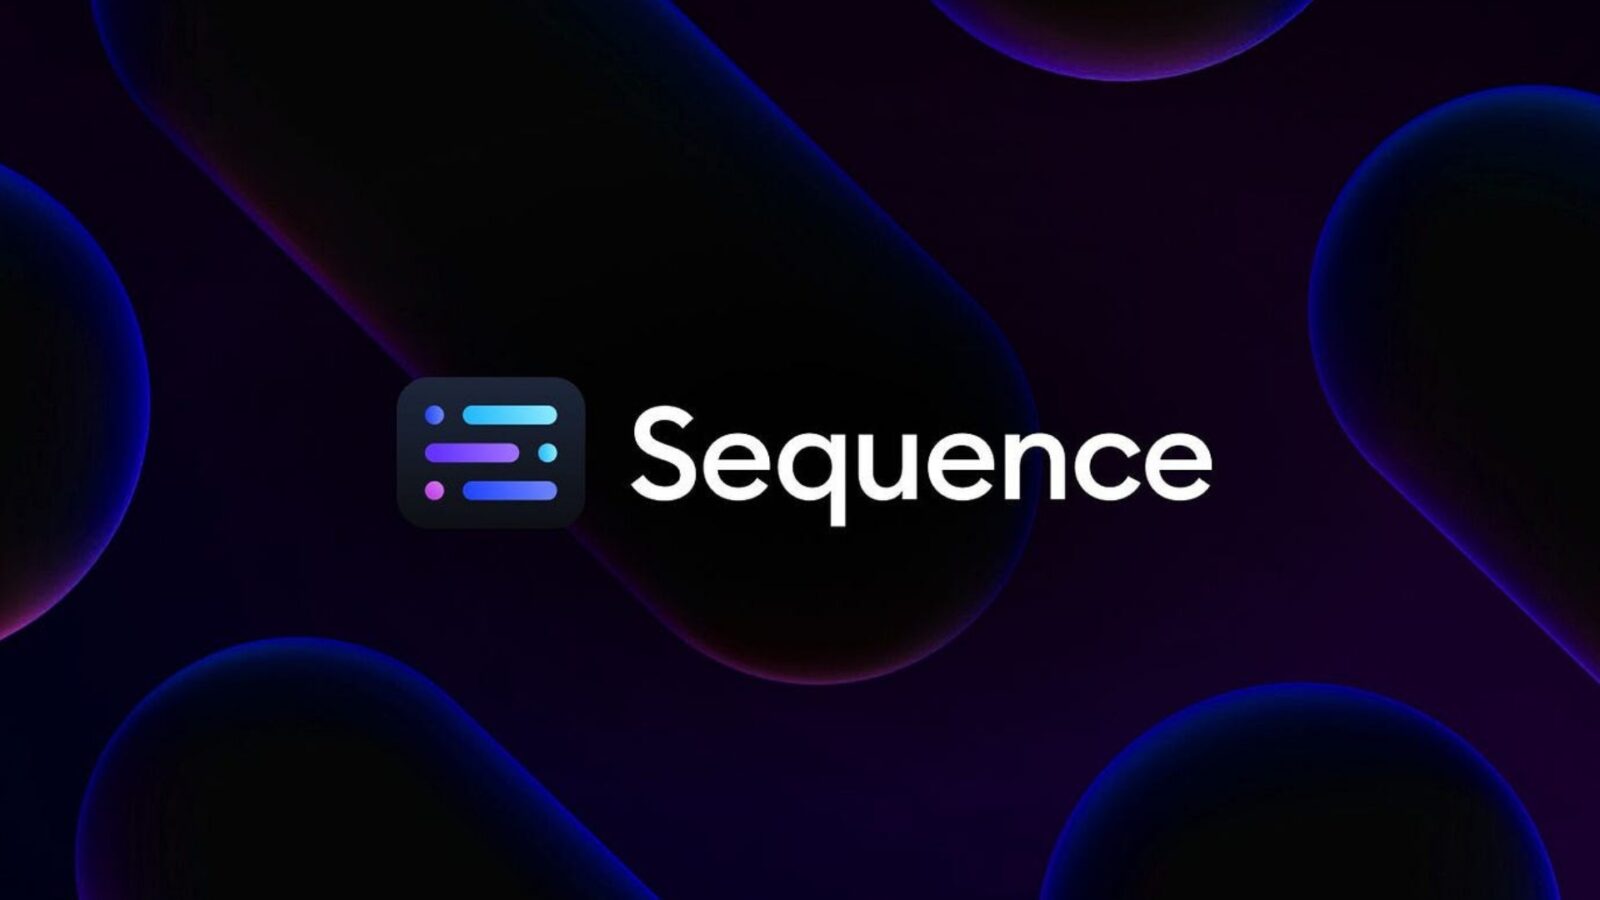 Sequence Introduces Innovative Embedded Wallets Technology